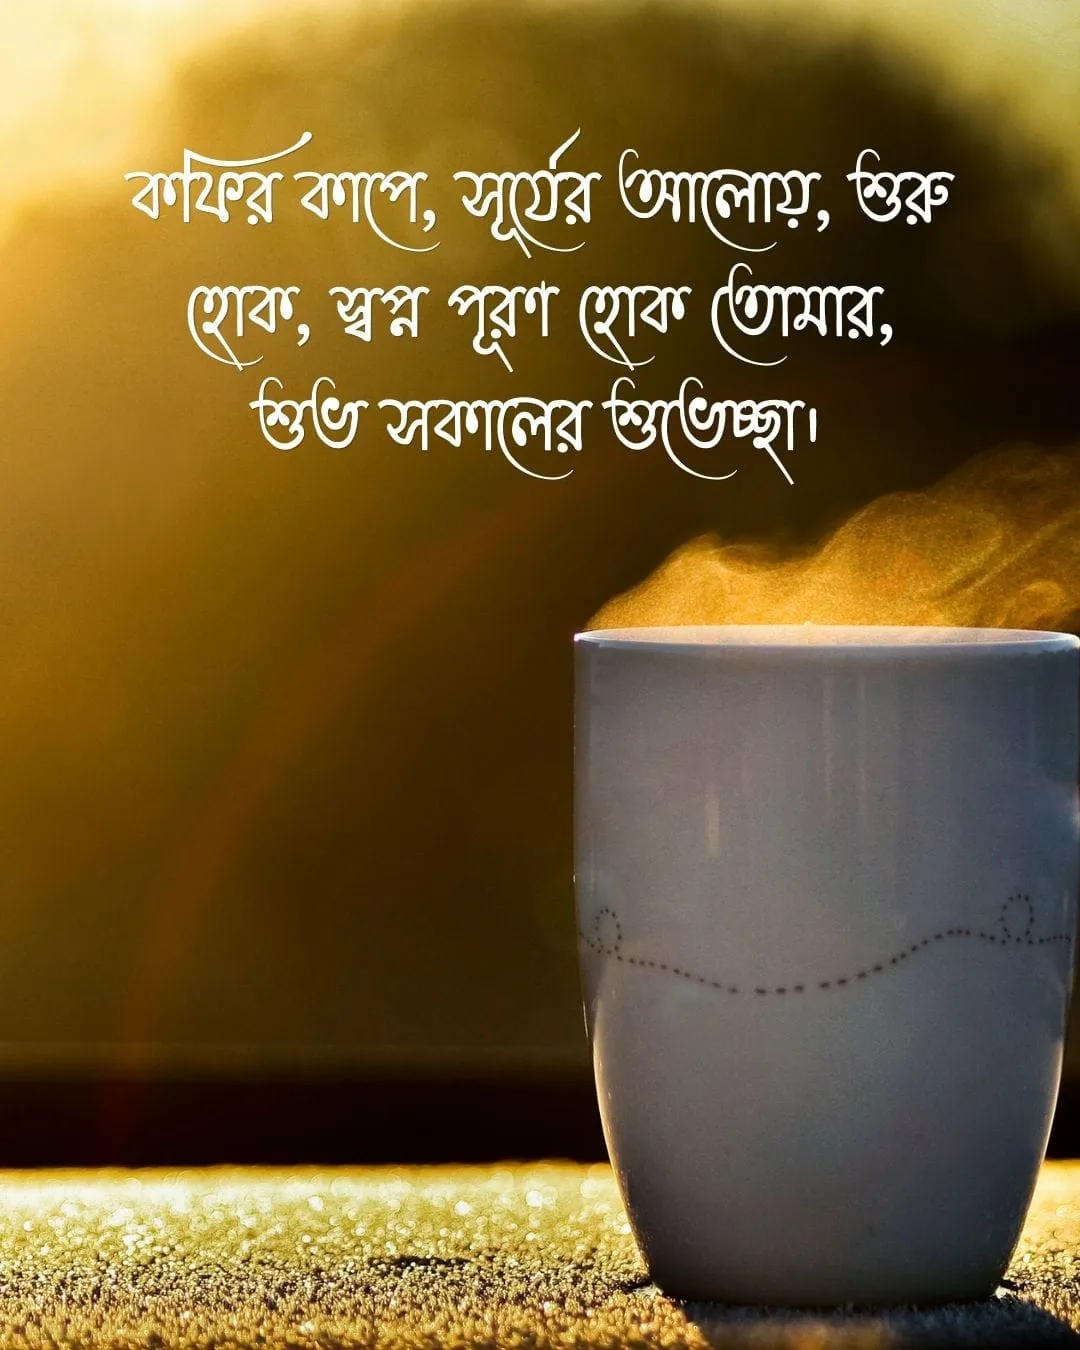 good moring wishes image in bengali 2